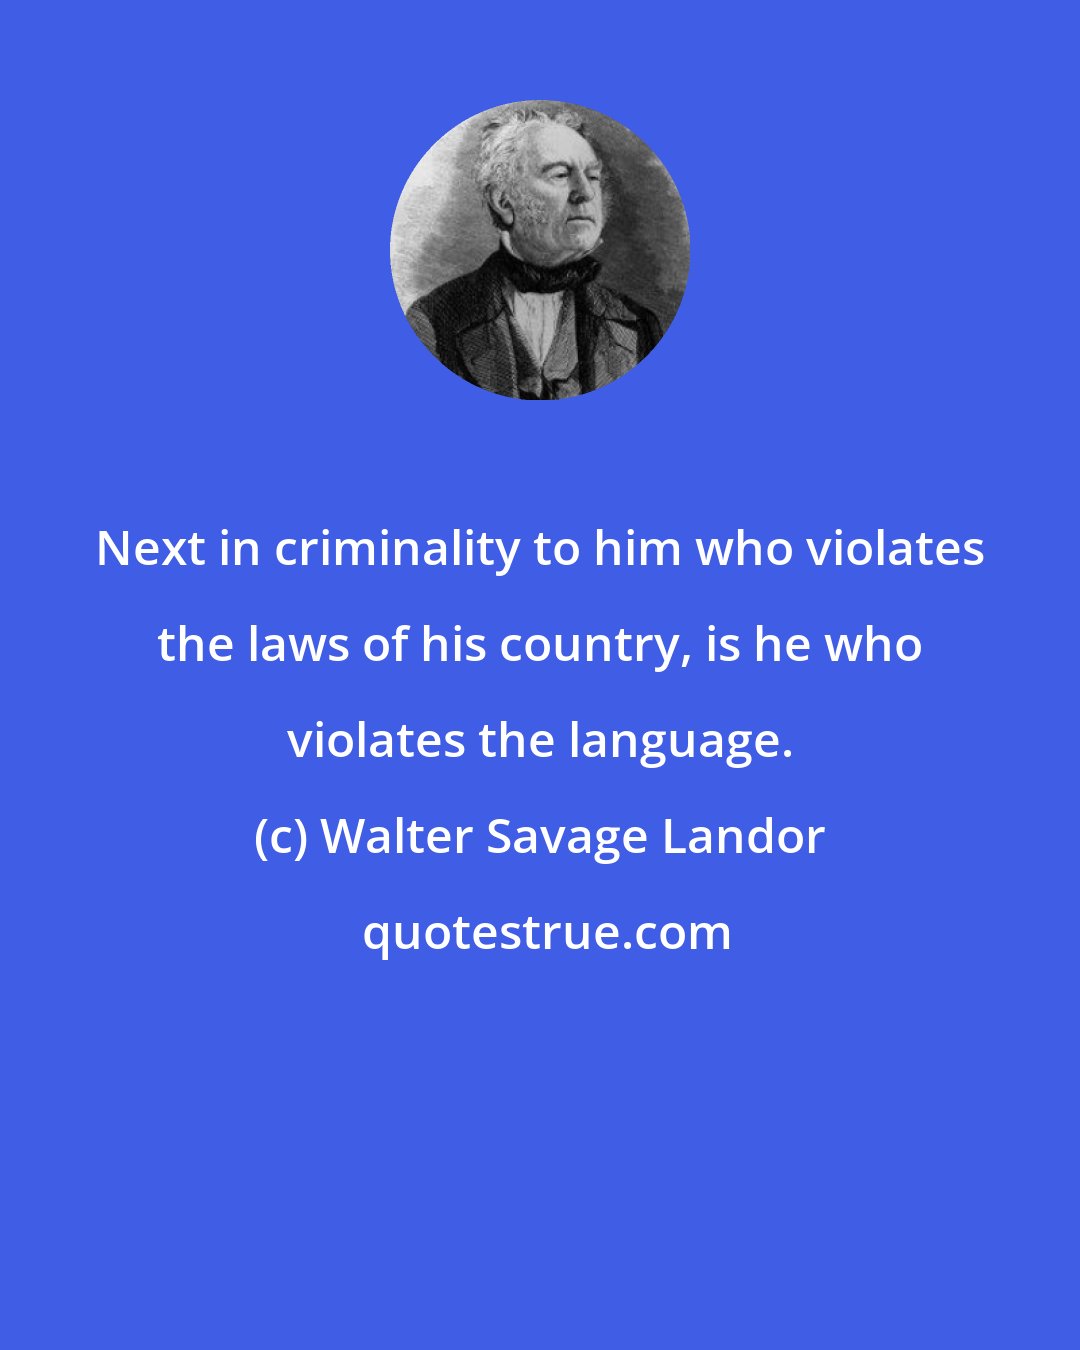 Walter Savage Landor: Next in criminality to him who violates the laws of his country, is he who violates the language.